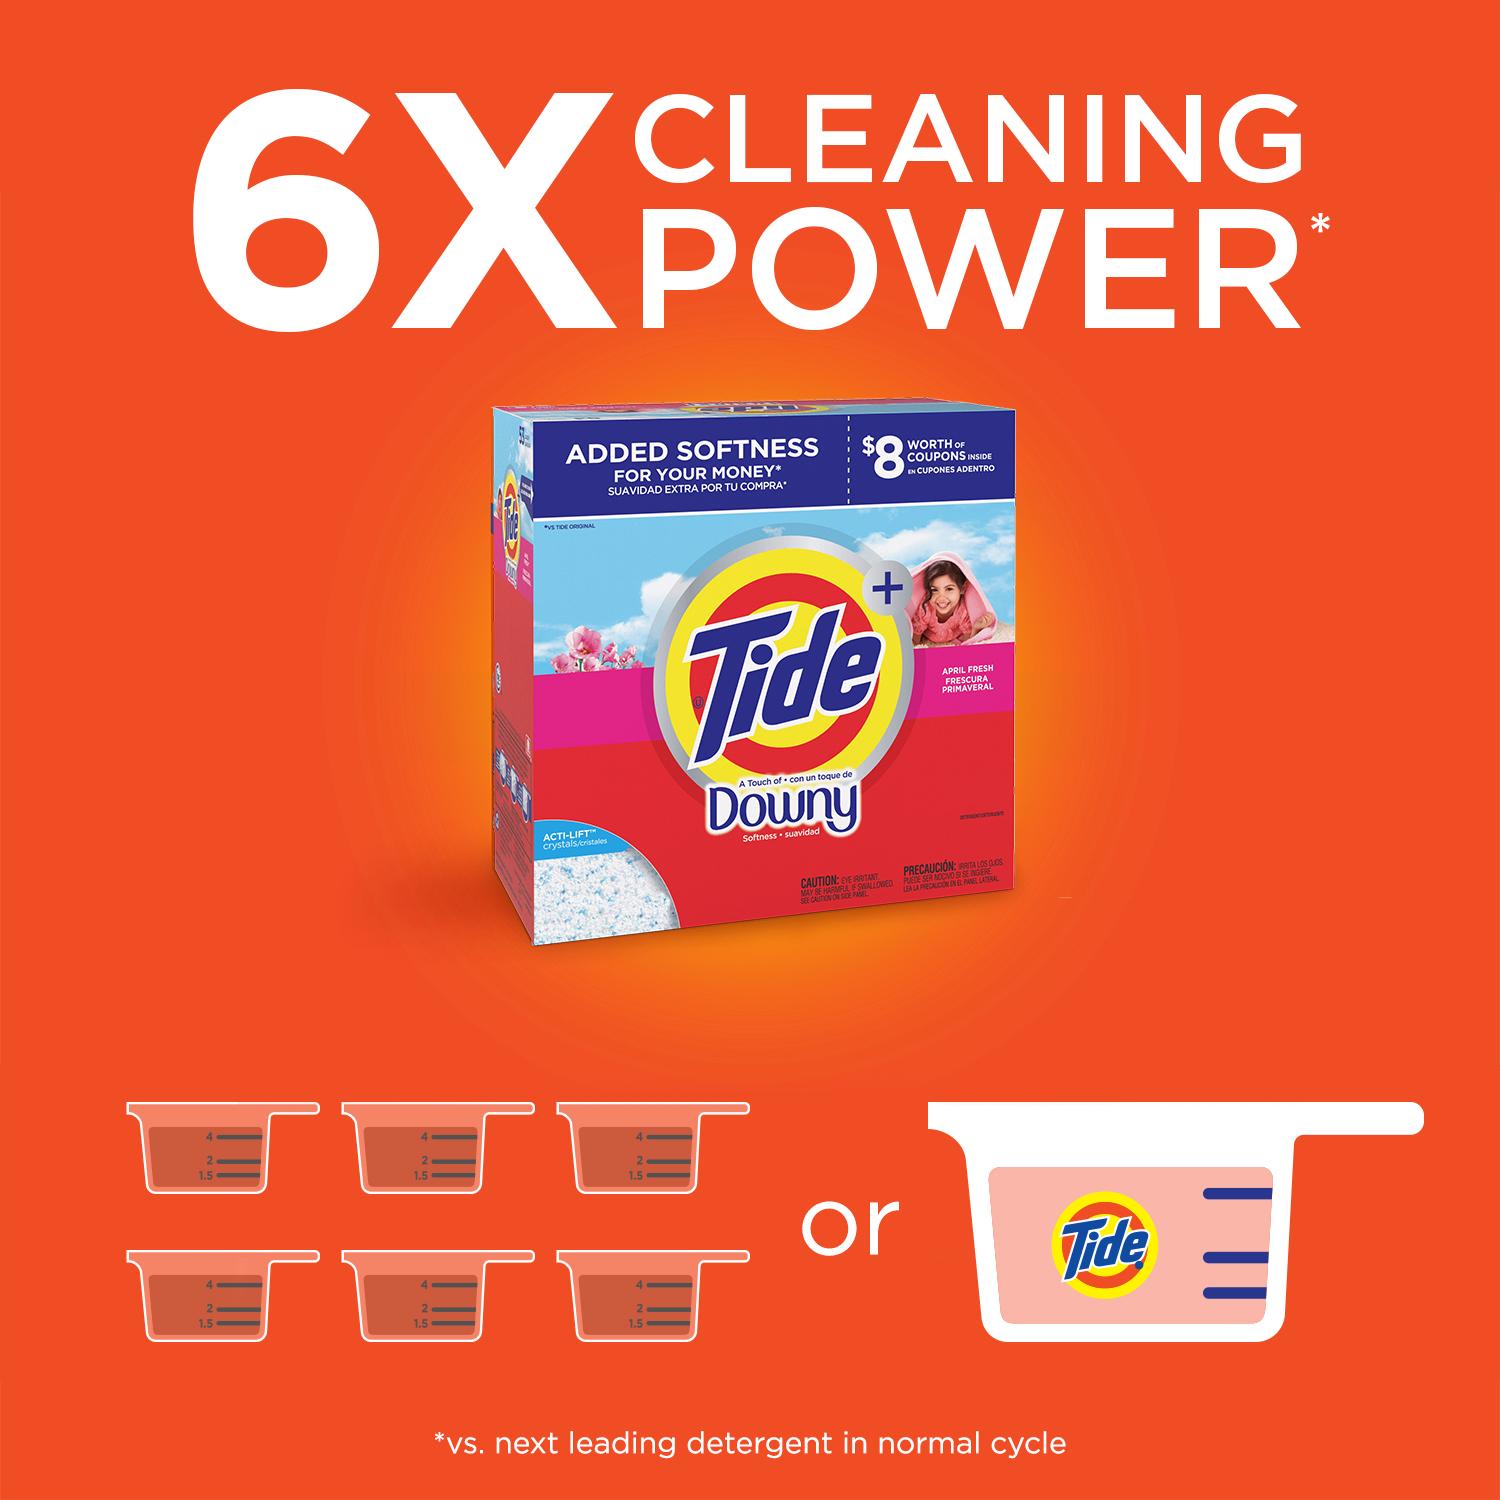 Amazon.com: Tide Ultra Plus A Touch Of Downy He April ...